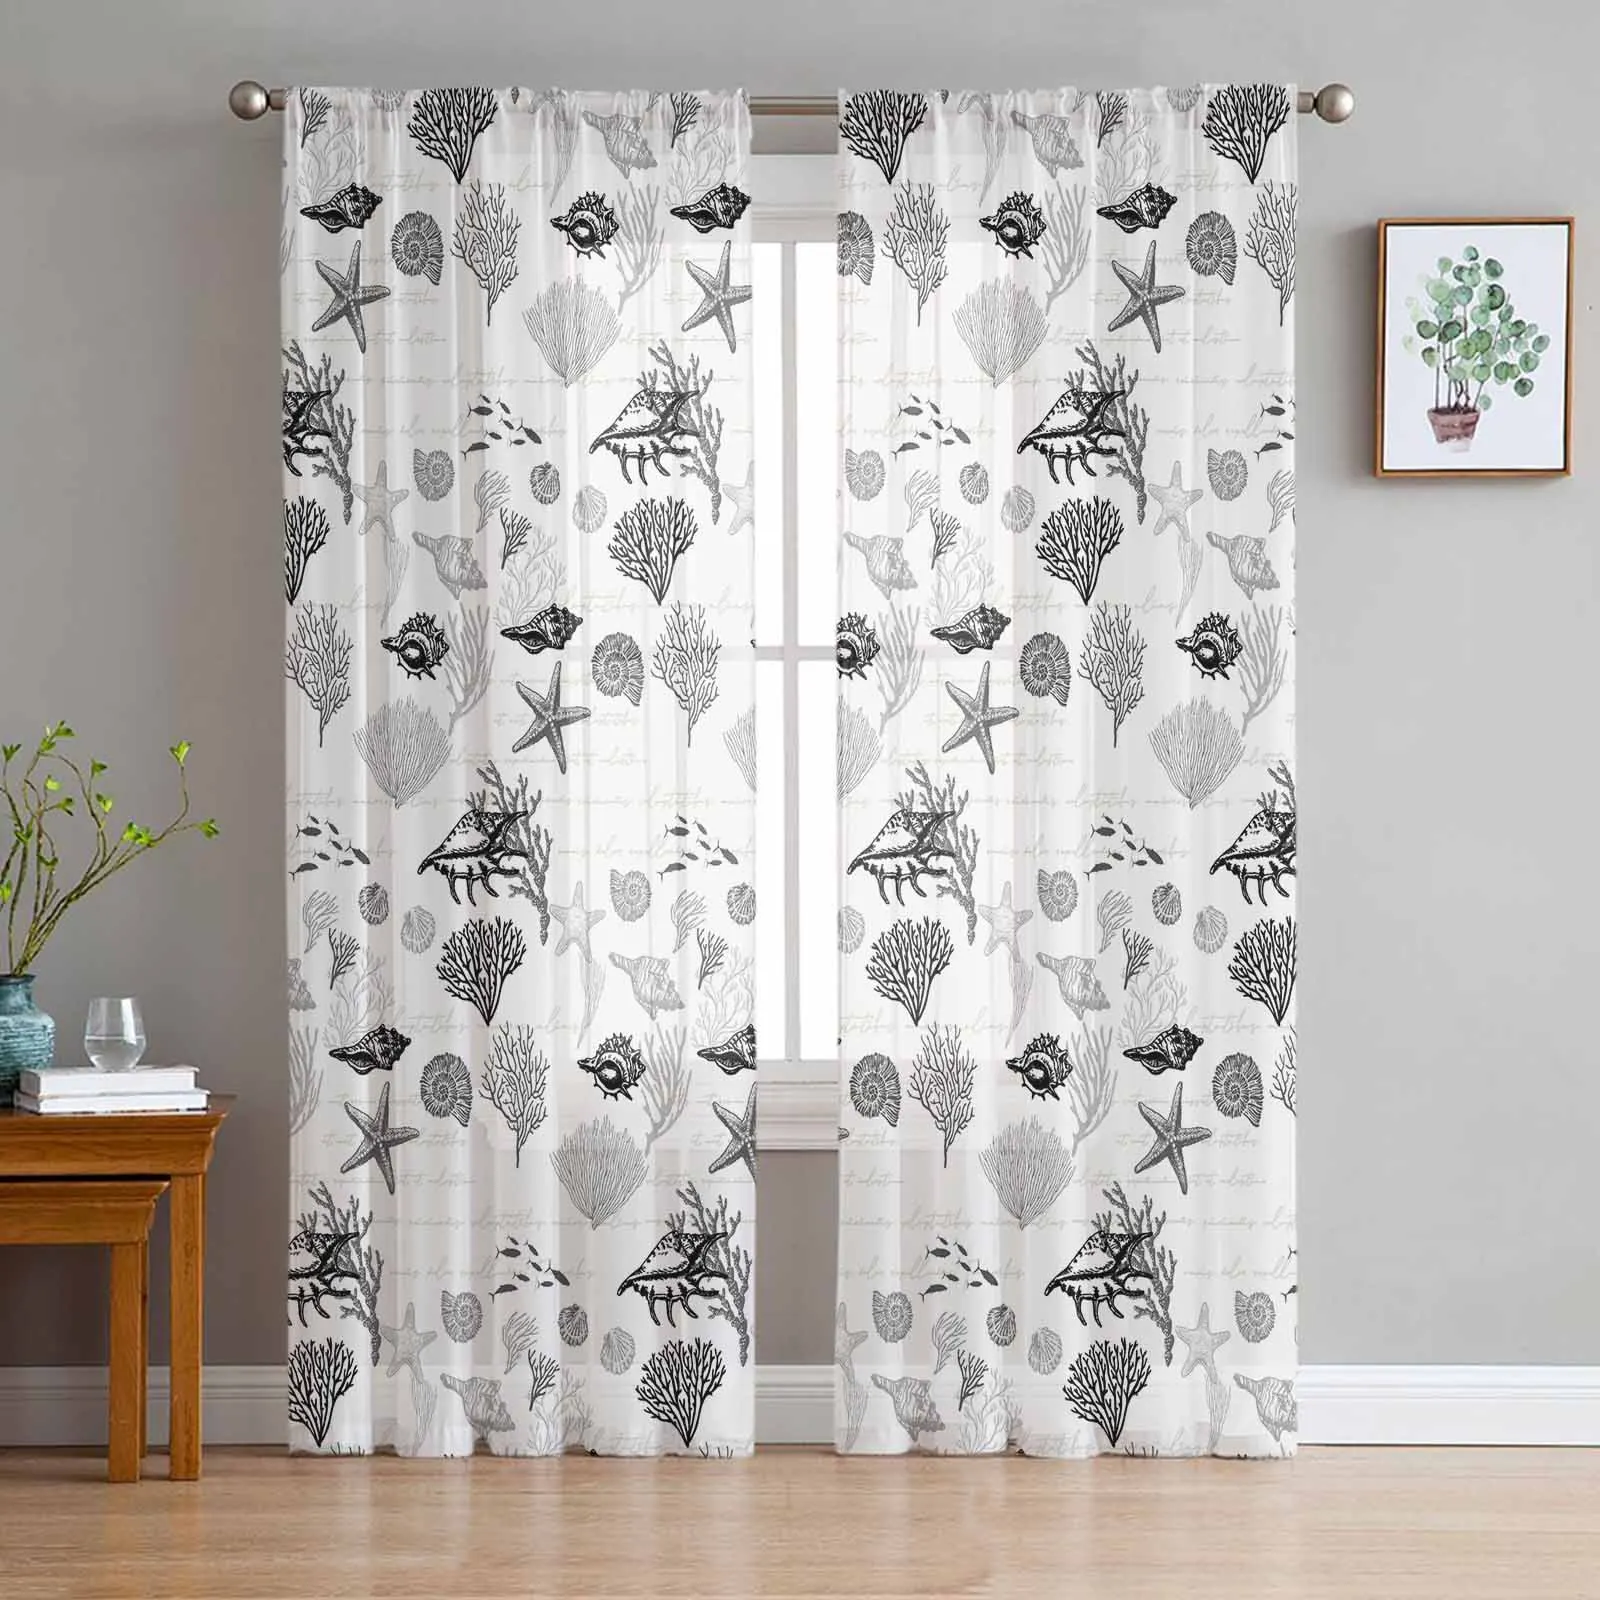 

Starfish Shell Coral Vintage Black Grey Sheer Curtains for Kids Bedroom Living Room Voile Window Curtains Tulle Drapes